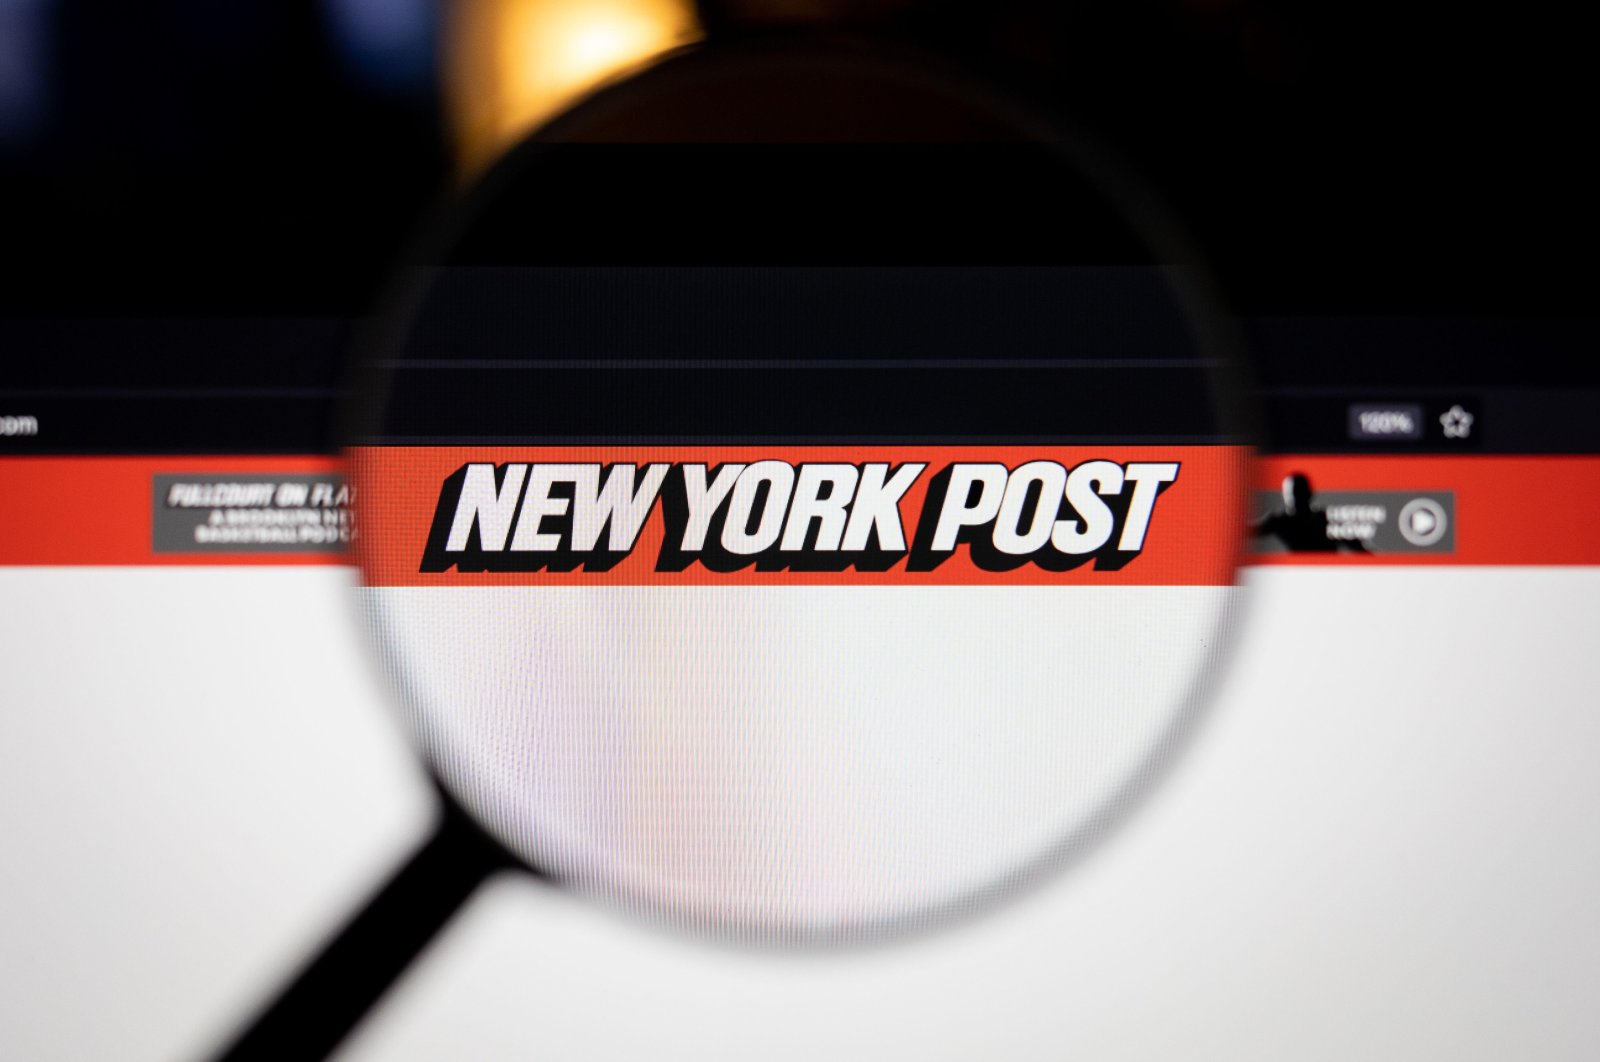 New York Post&#039;s logo is seen on the daily tabloid&#039;s website on a computer screen, June 20, 2021. (Reuters Photo)